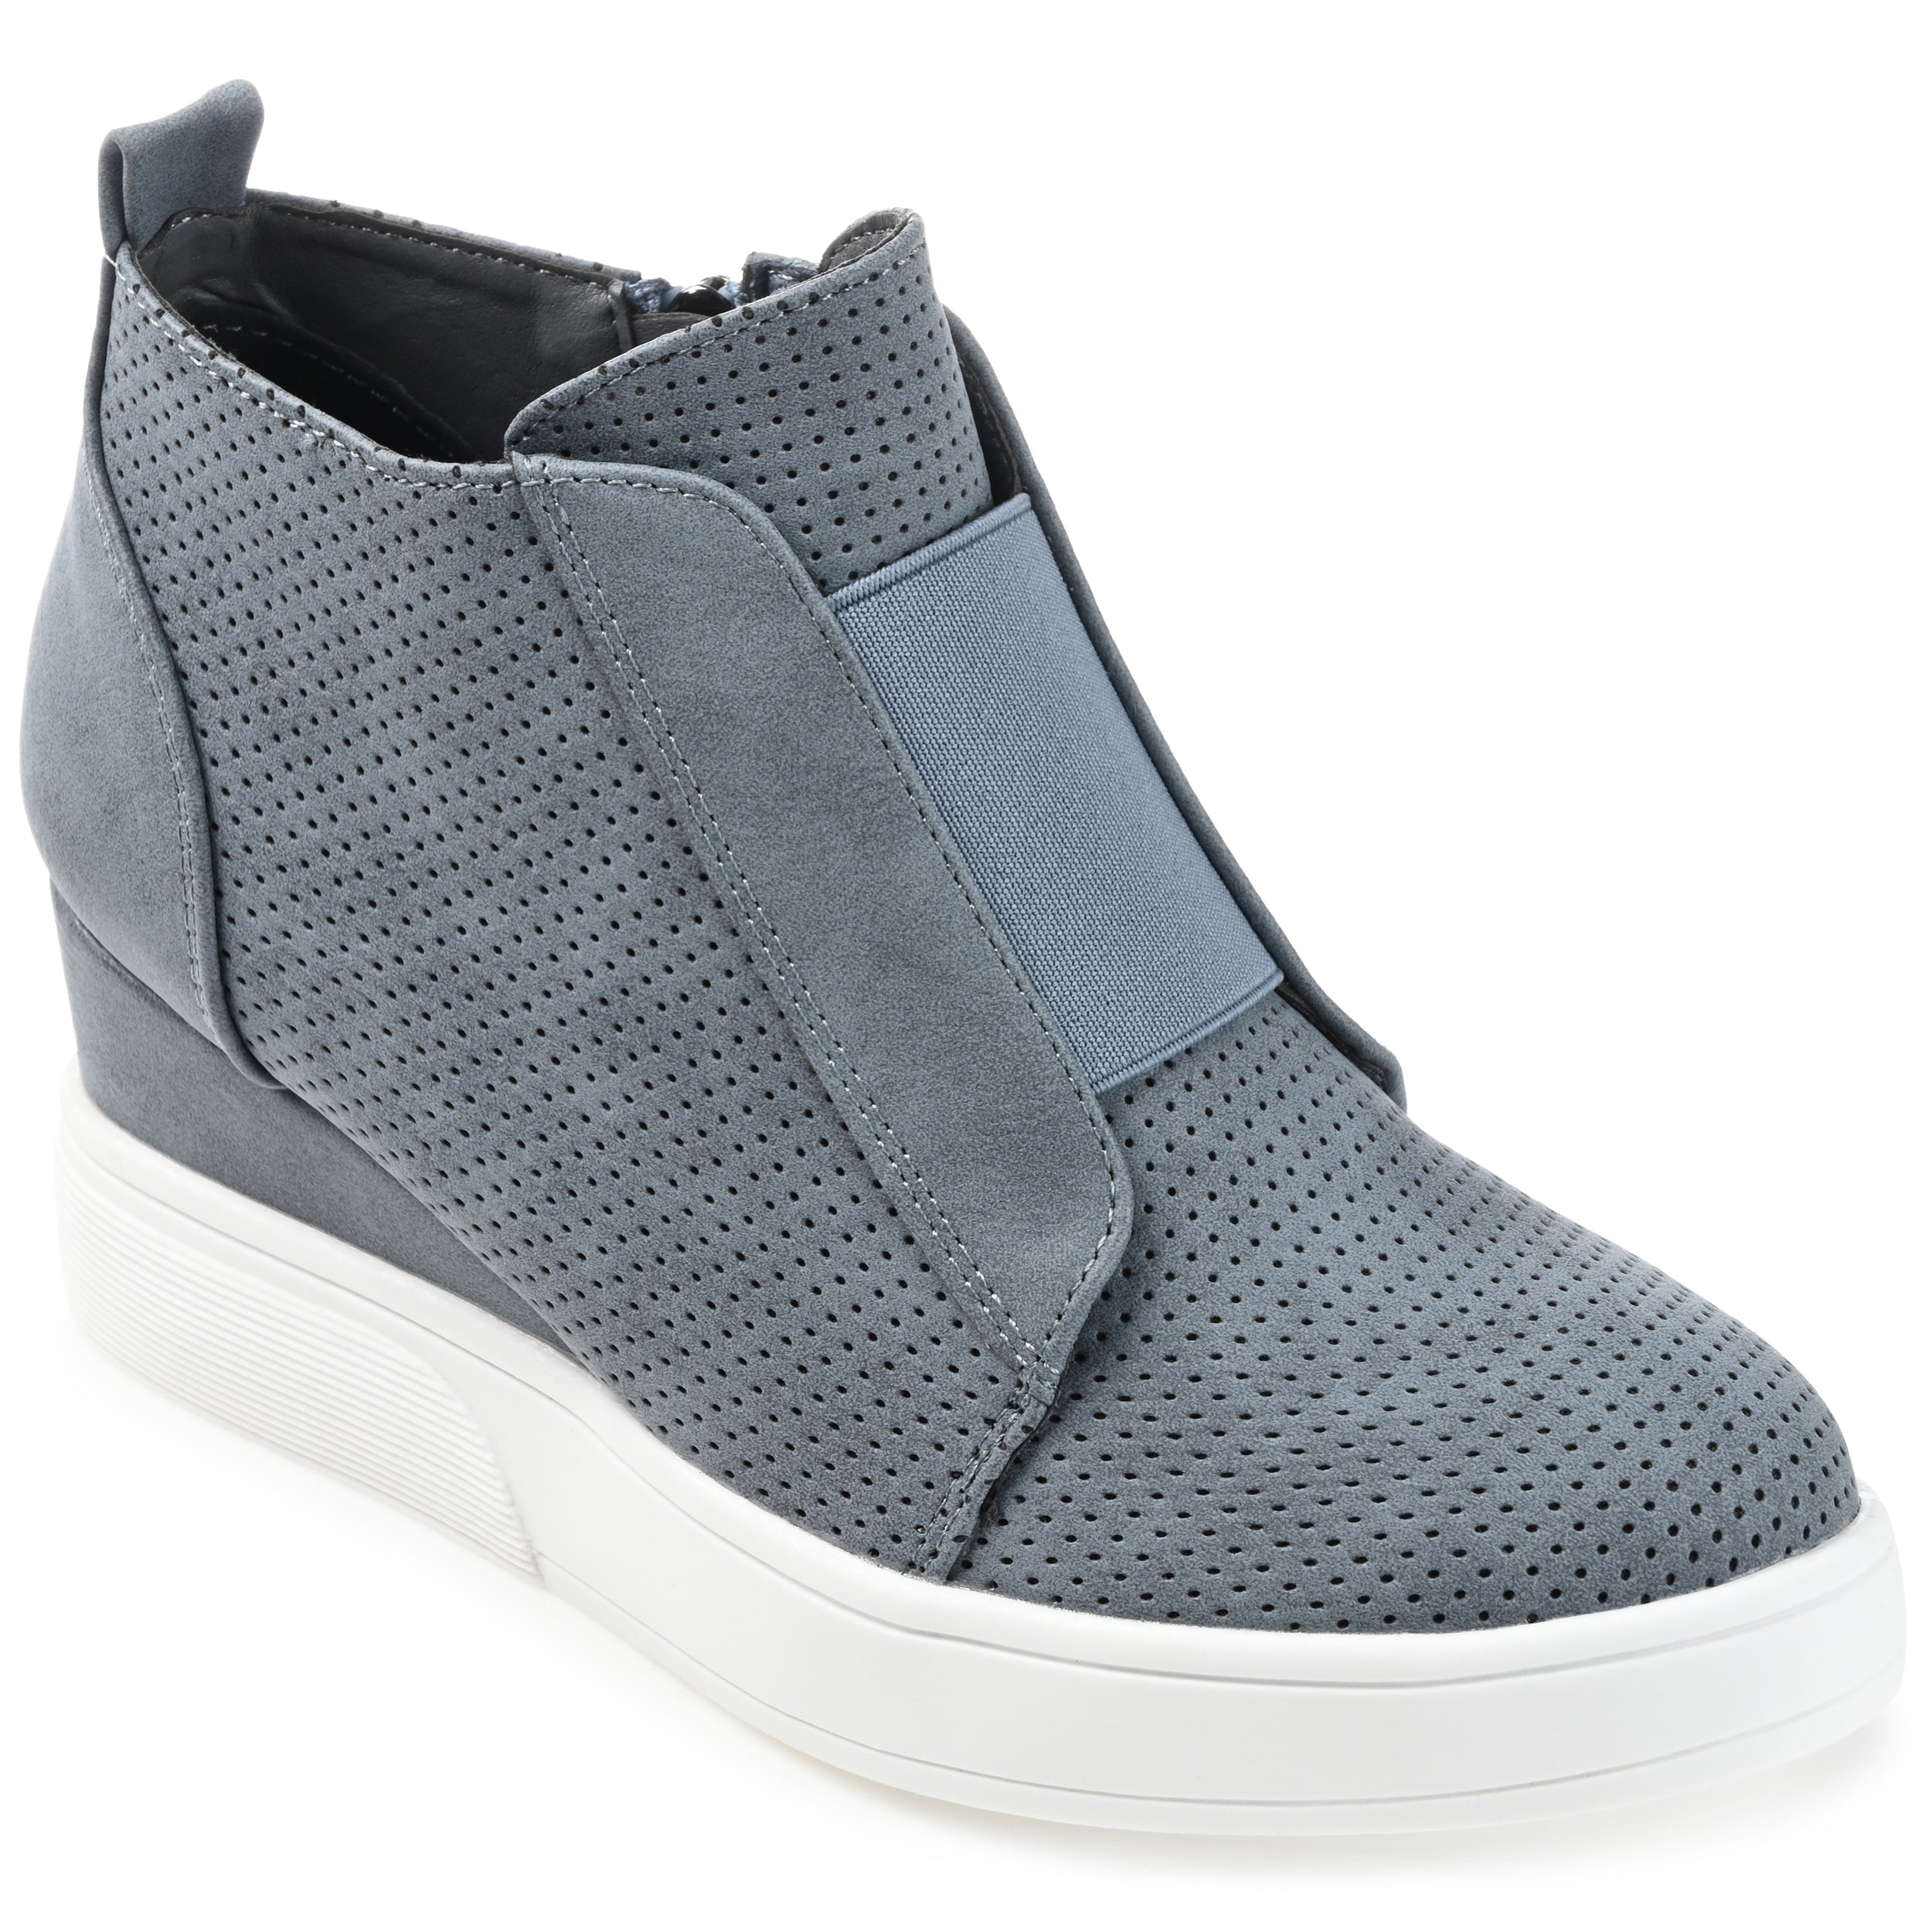 Clara Wedge Sneaker | Women's Wedged Shoes | Journee Collection